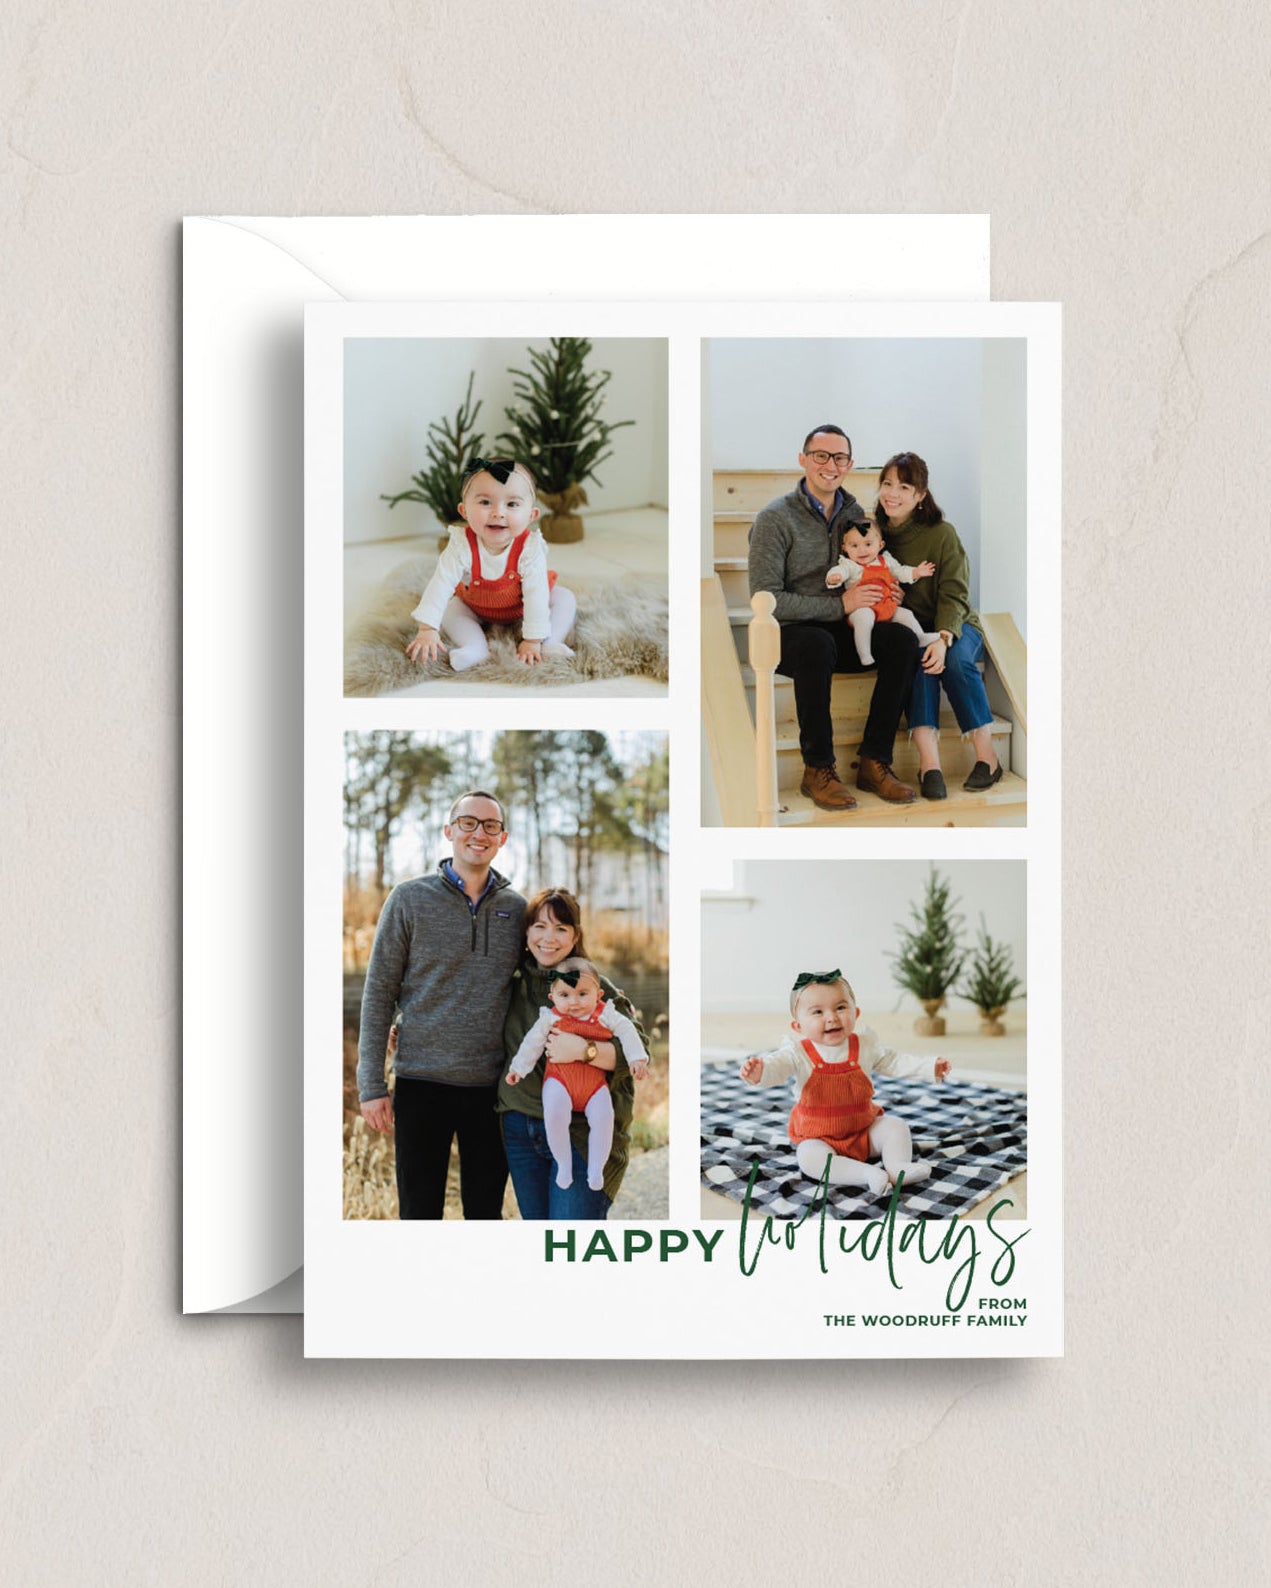 Merry Christmas/Happy Holidays Multi-Photo Card from Leighwood Design Studio